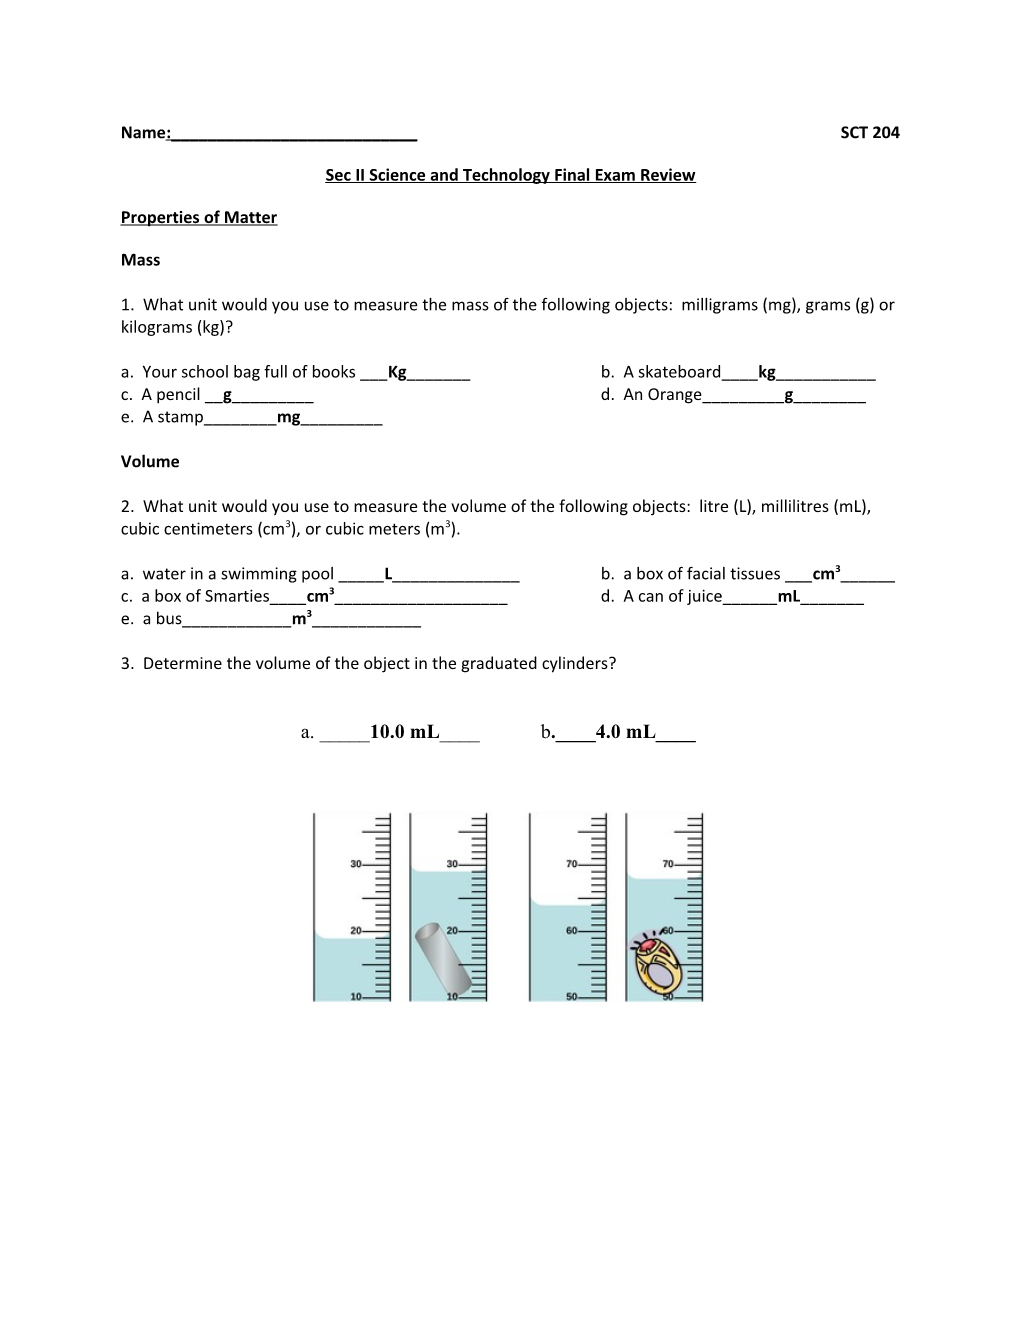 Sec II Science and Technology Final Exam Review